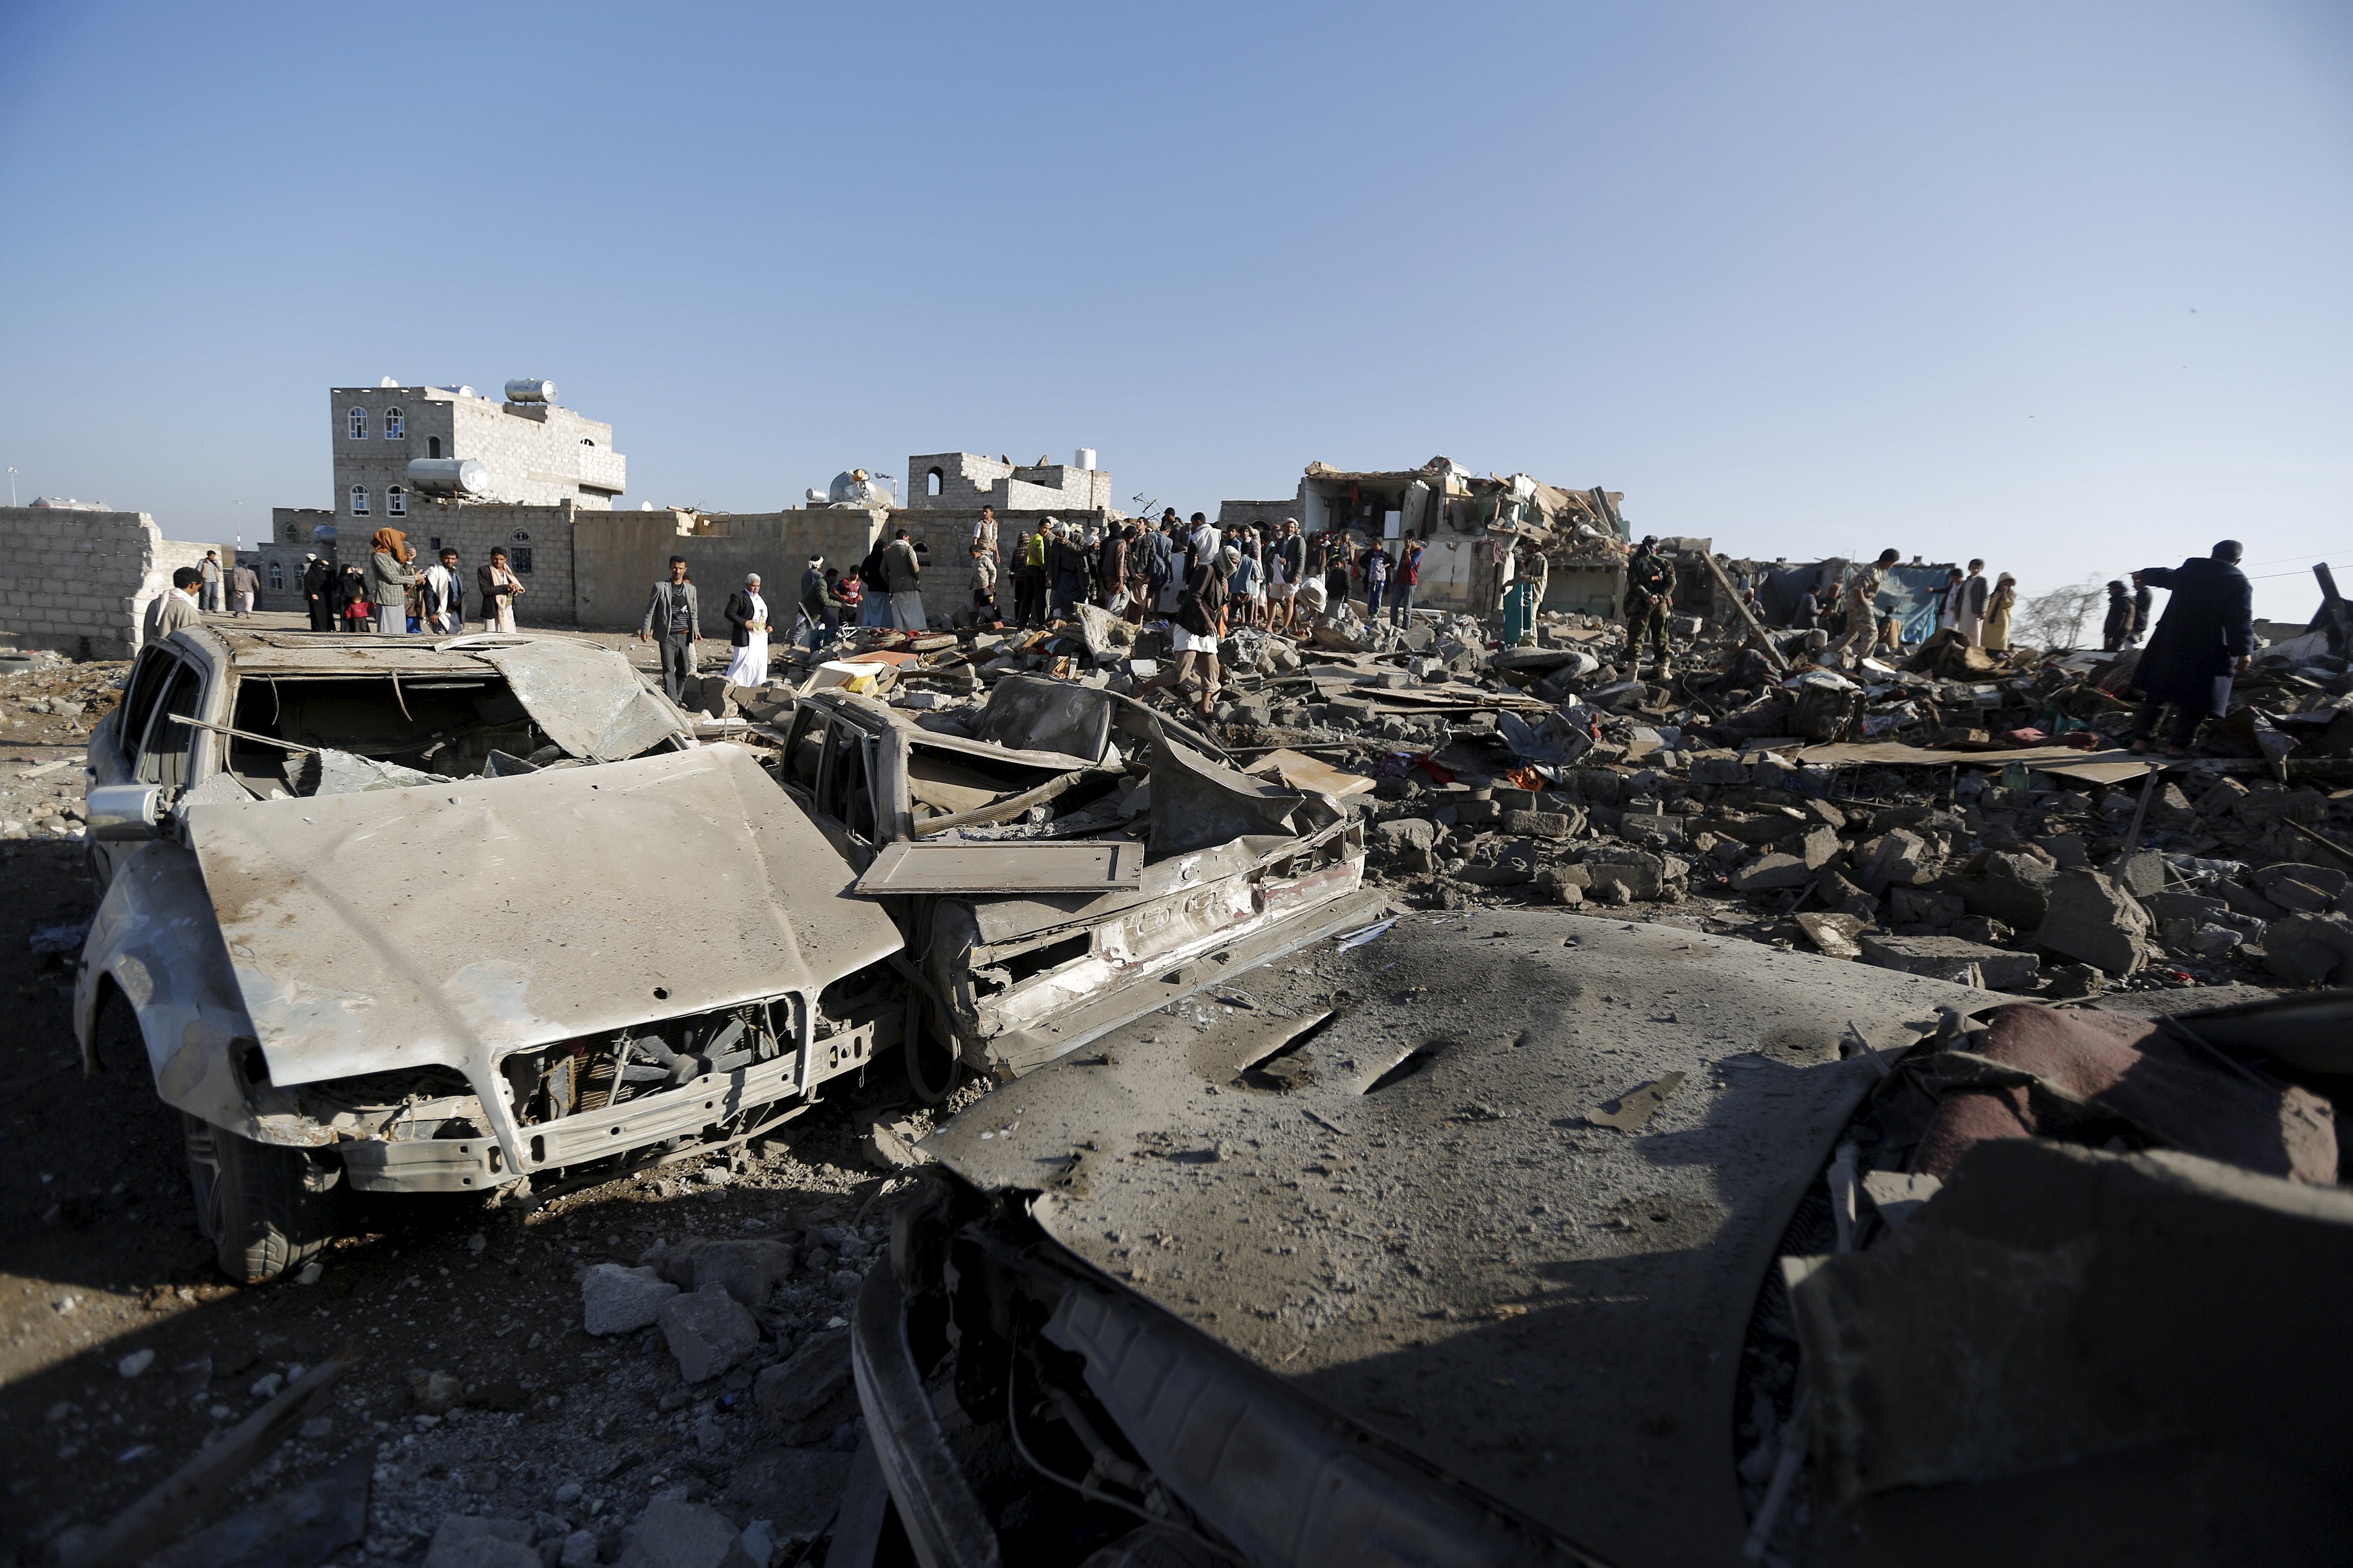 People gather at the site of an air strike at a residential area near Sanaa Airport March 26, 2015. Saudi Arabia and Gulf region allies launched military operations including air strikes in Yemen on Thursday, officials said, to counter Iran-allied forces besieging the southern city of Aden where the U.S.-backed Yemeni president had taken refuge. REUTERS/Khaled Abdullah